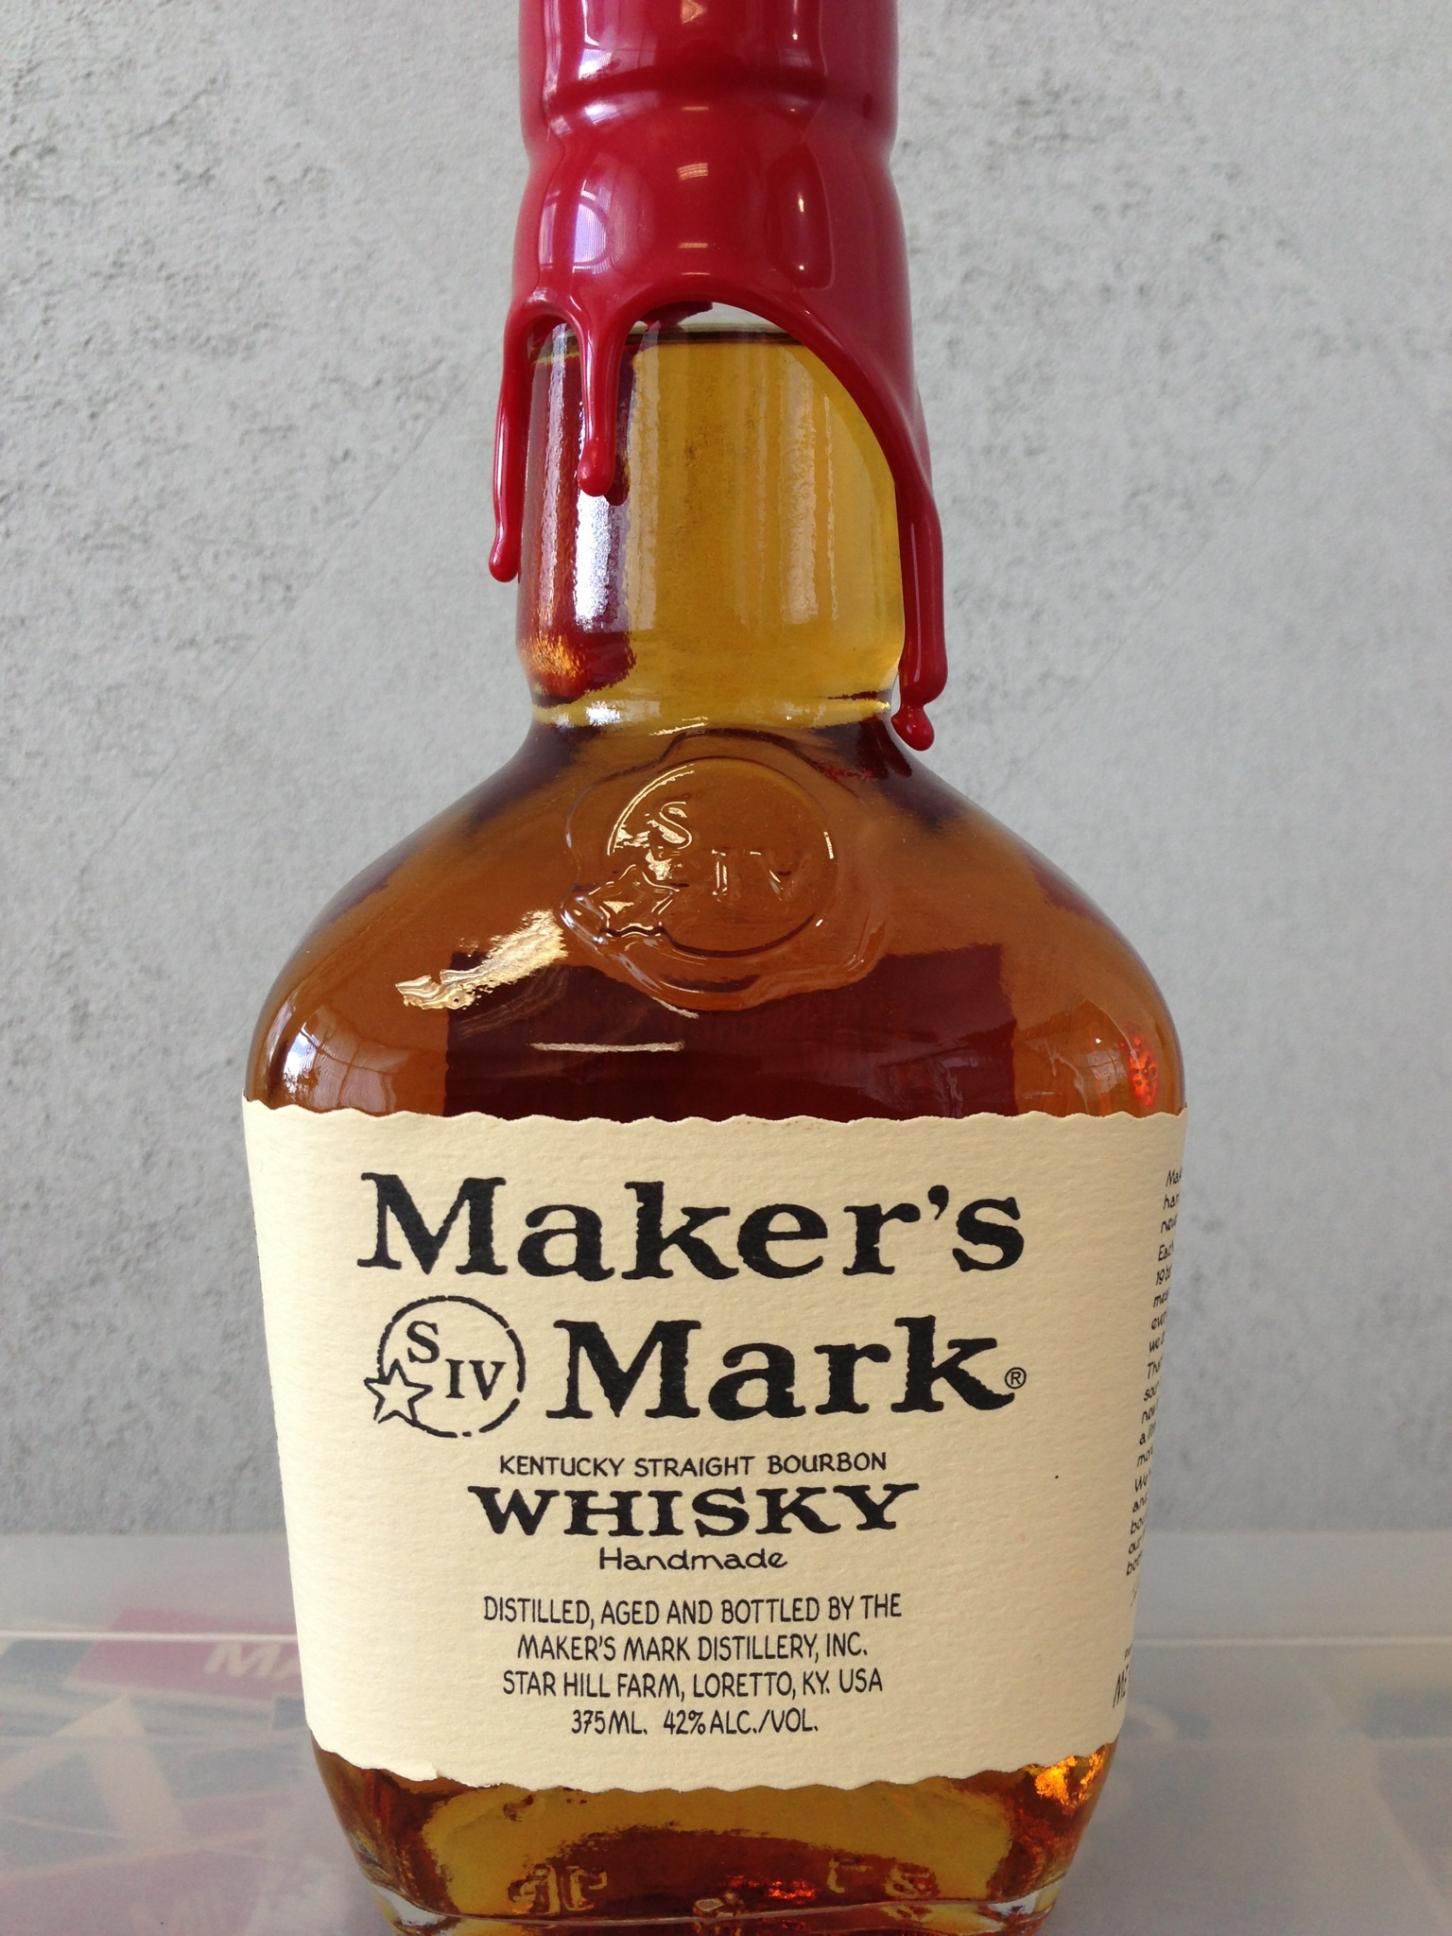 Photos of New Maker's Mark Bottle and label at 42, lowered 84 Proof